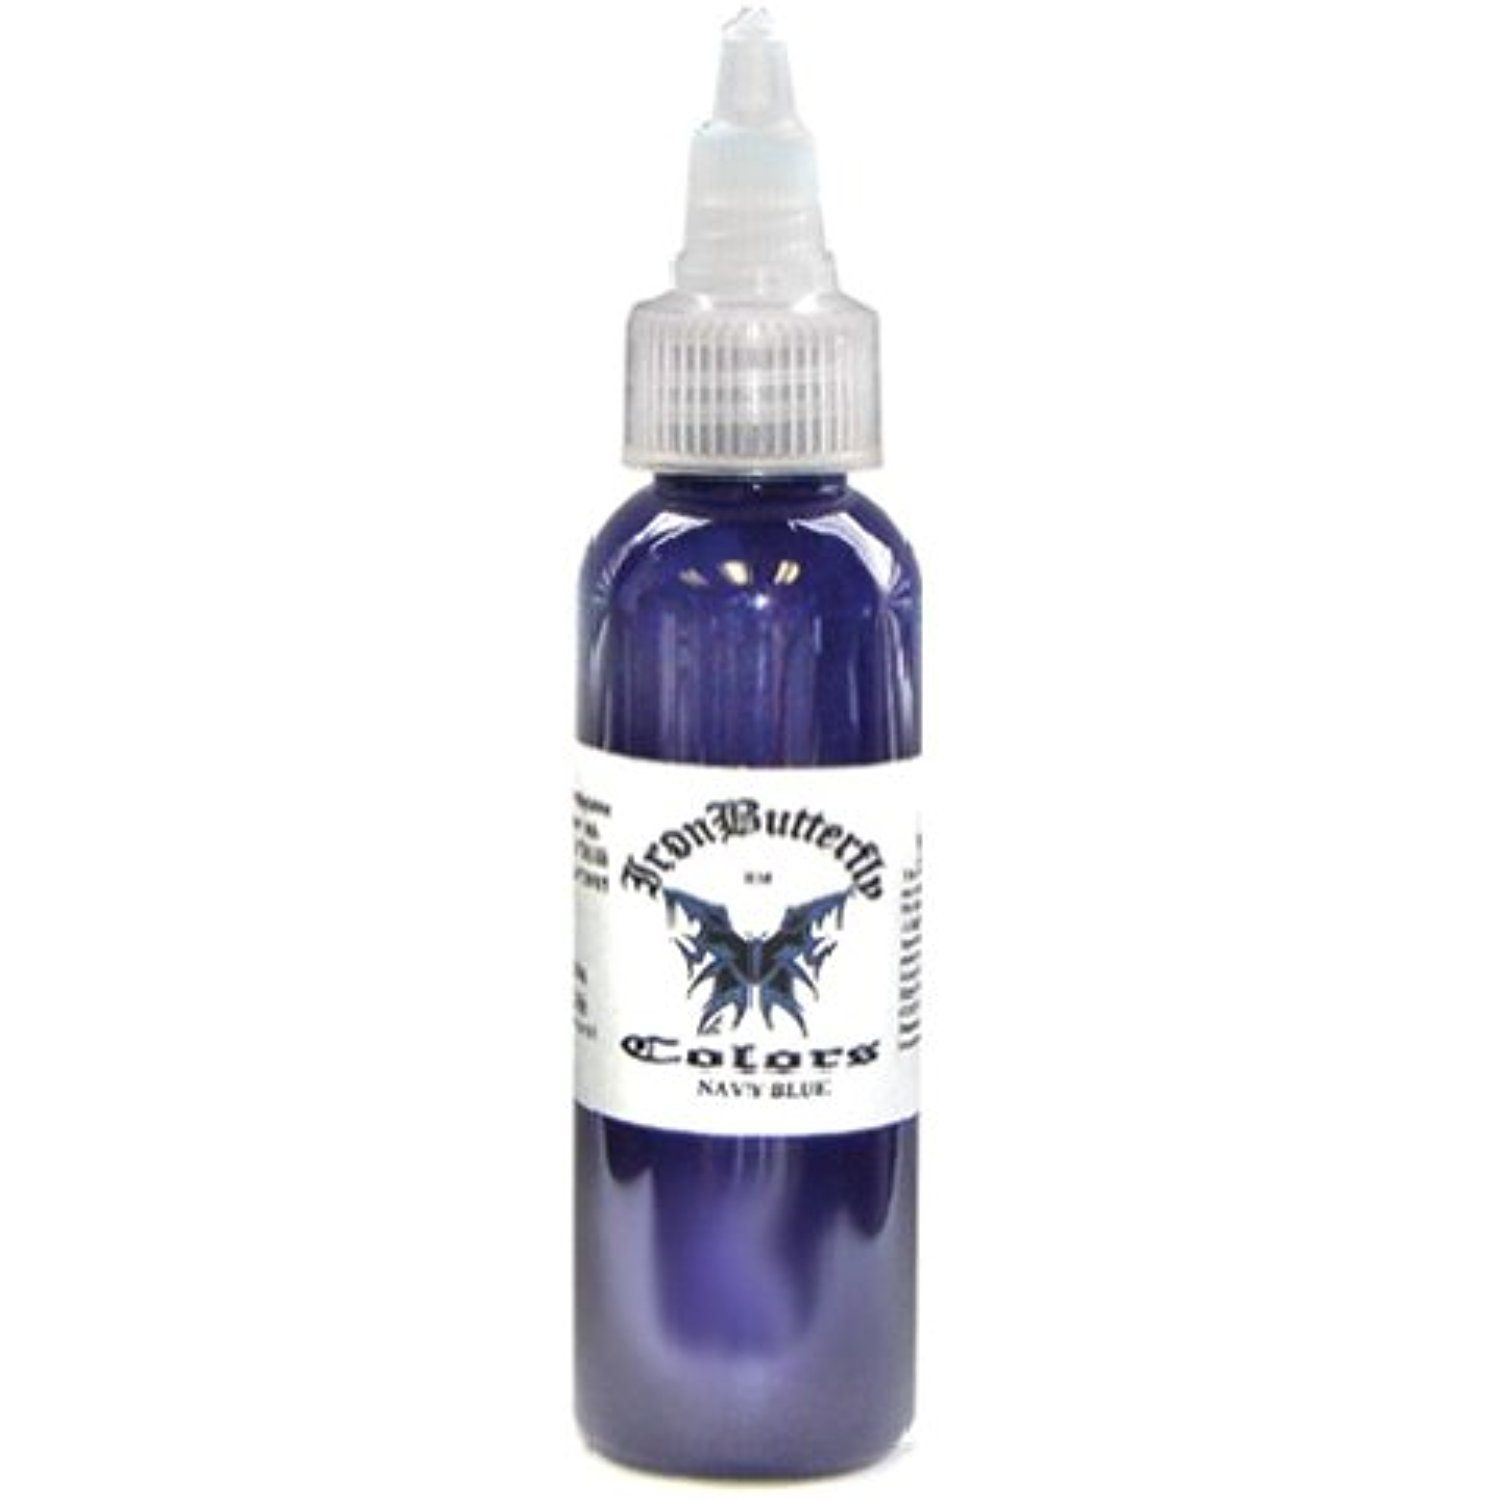 Iron Butterfly Ink Navy Blue 2oz Bottles Tattoo Supplies Click pertaining to dimensions 1500 X 1500